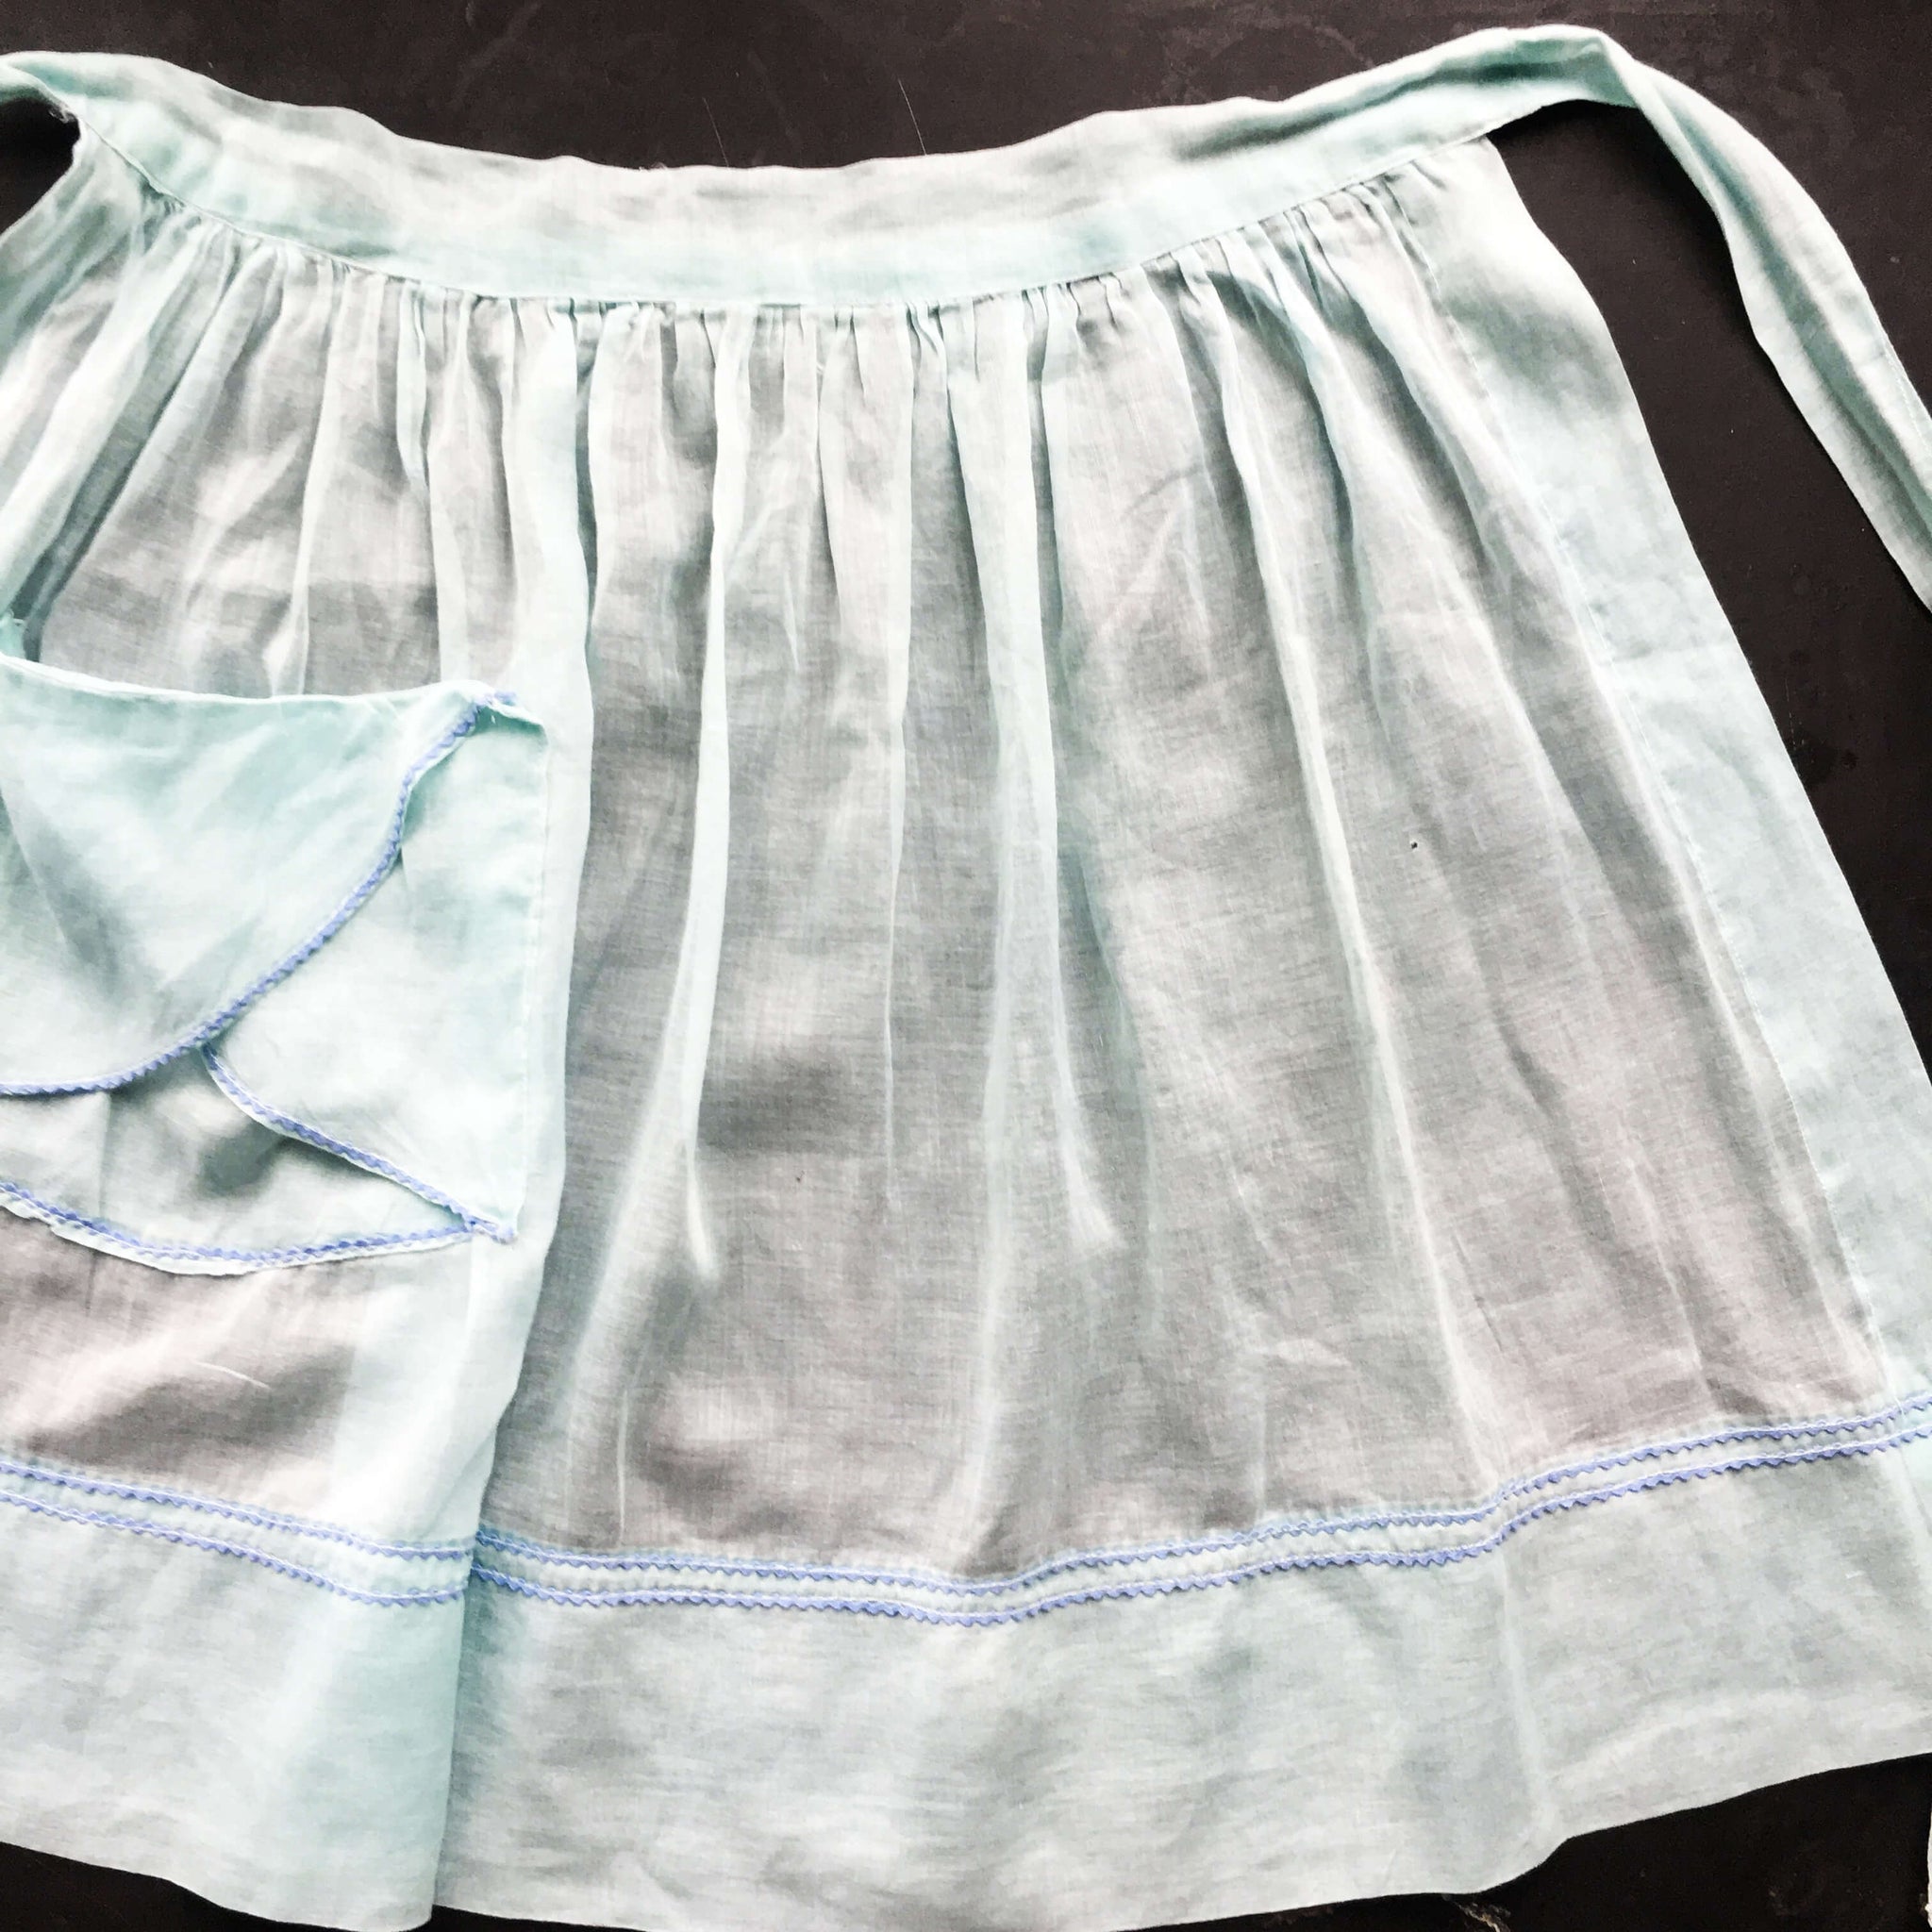 Vintage Mint Green Half Apron with Blue Ric Rac Details and Pintucks - Handmade